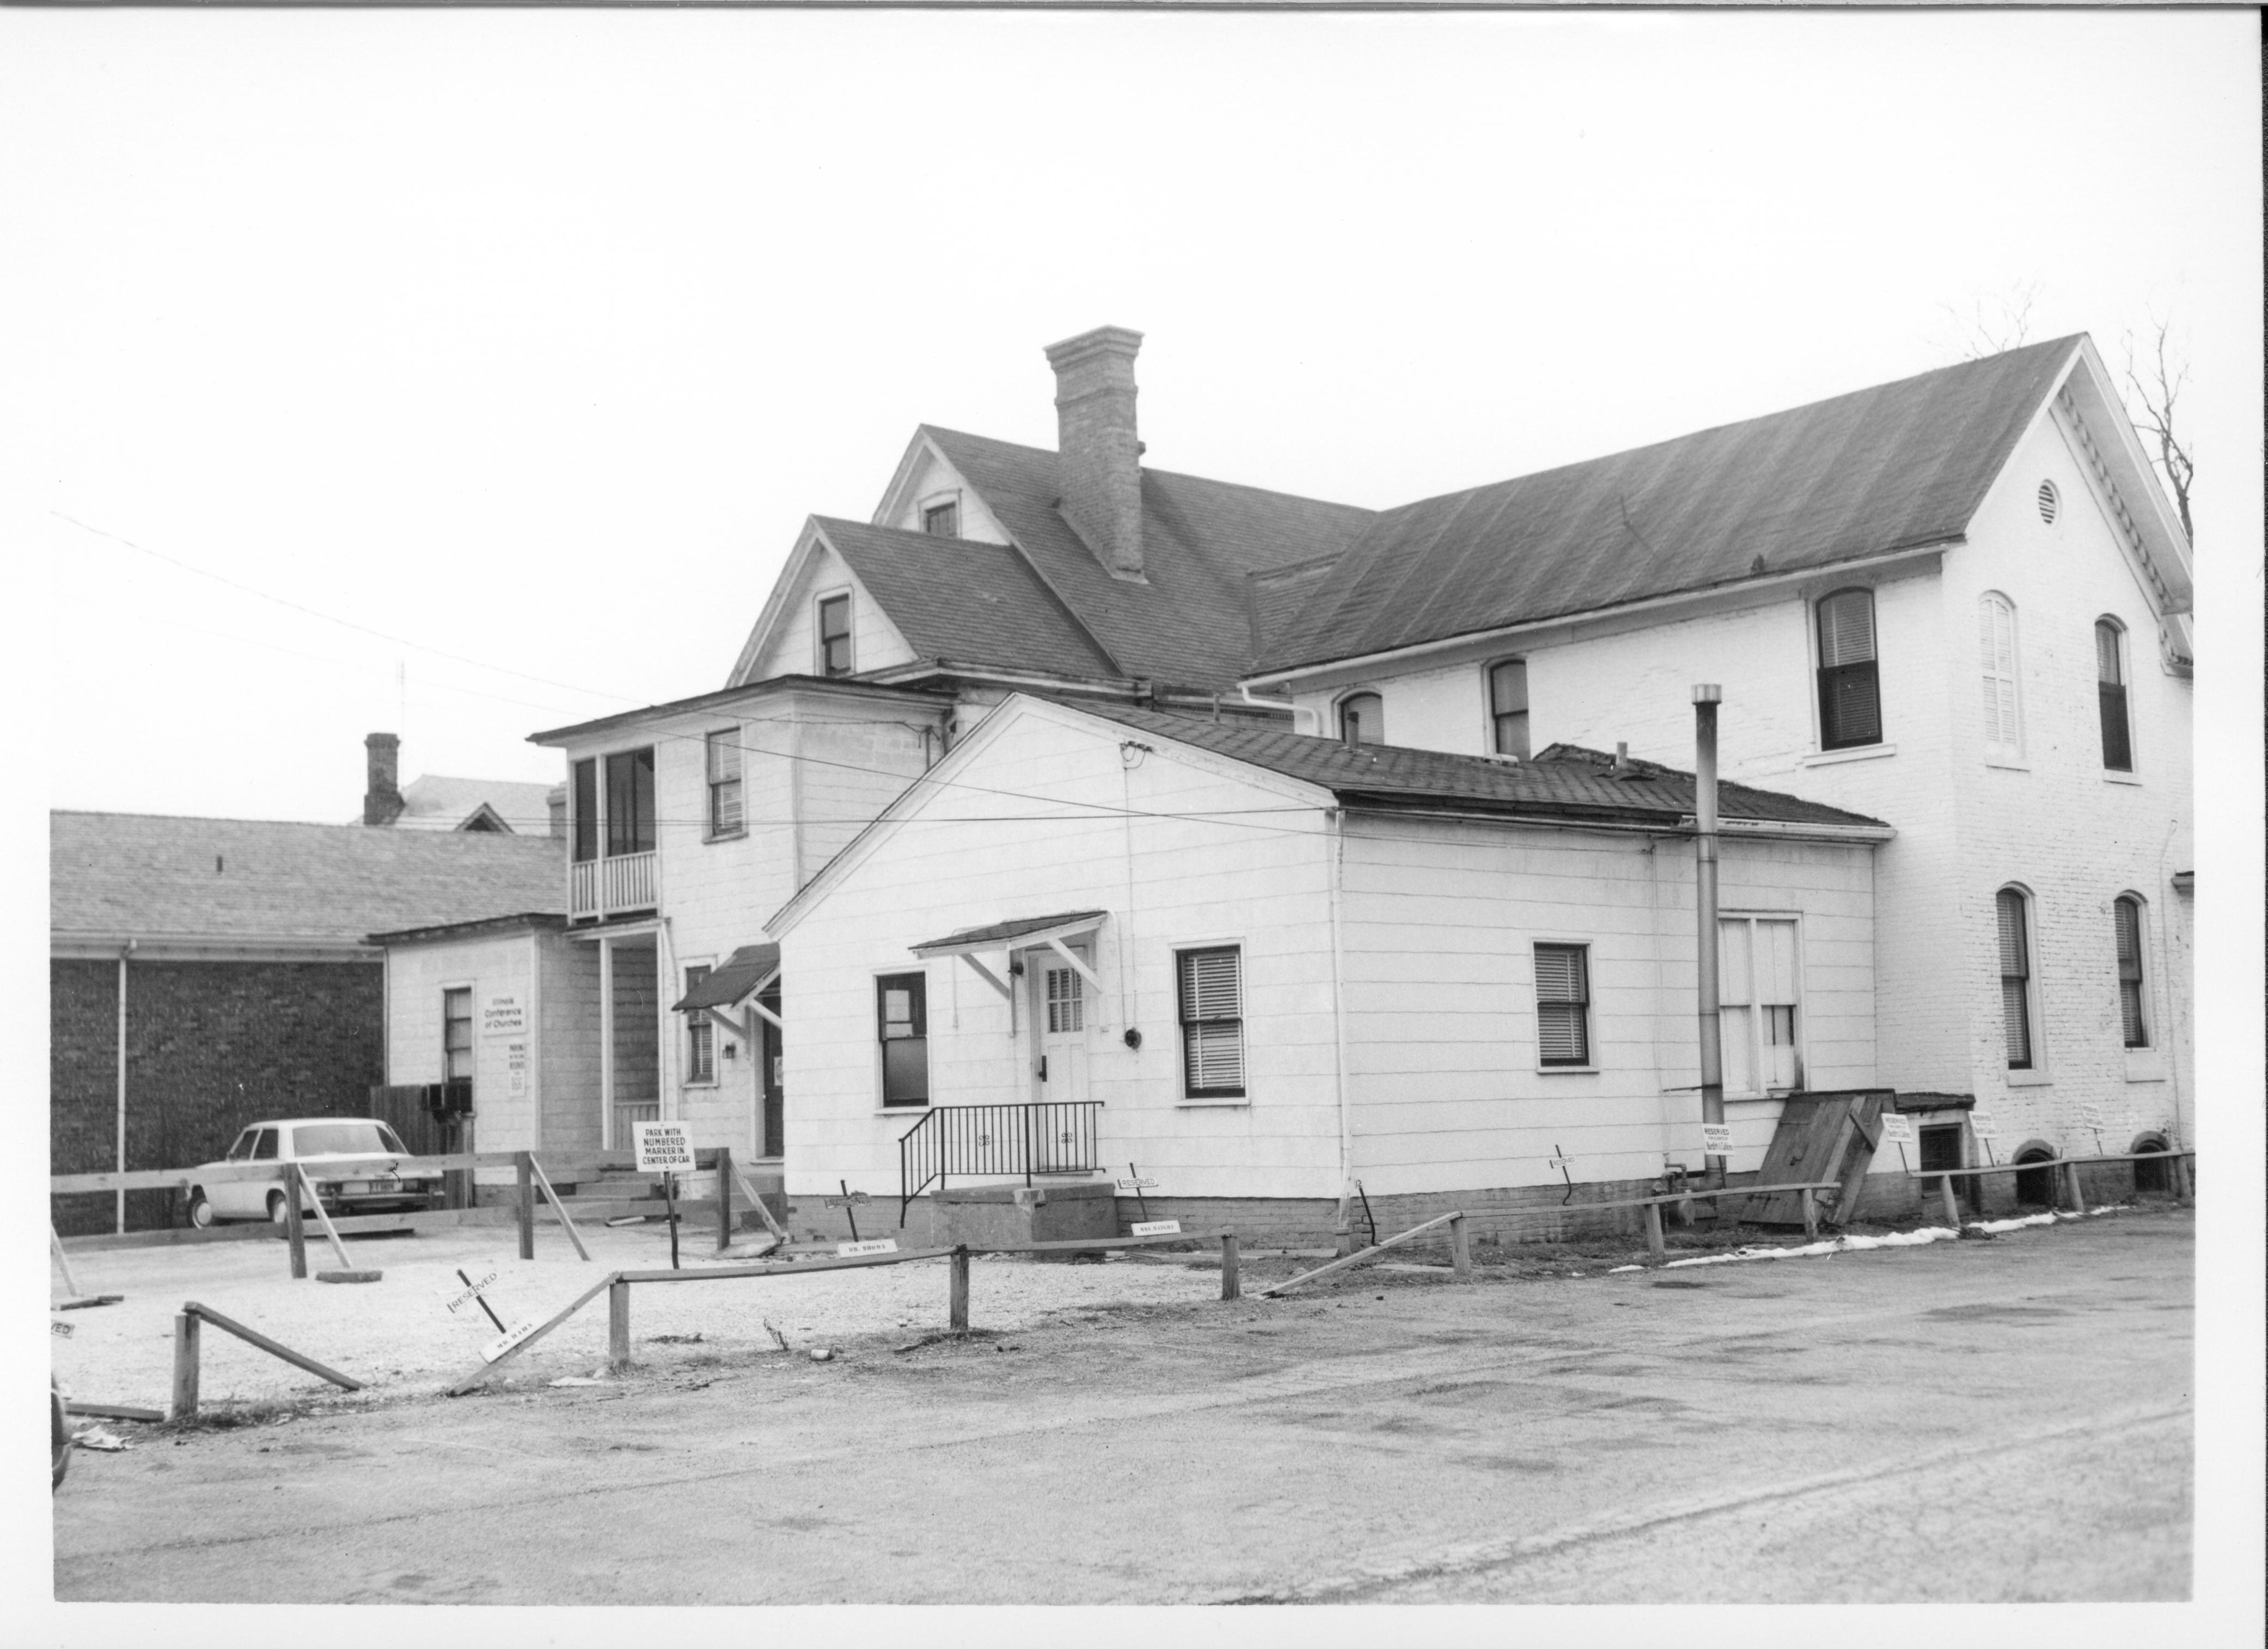 Homes belonging to Dr. Albert T. Kwedar (right), Eugene McNally (center), and Evelyn Grummon (left) on Block 7, Lots 4-6 along 7th Street. Area is now Visitor Center and bus parking lot/Grace Lutheran Church parking lot. Looking Southwest along 7th Street south of Capitol Ave. Visitor Center, parking lot, Kwedar, McNally, Grummon